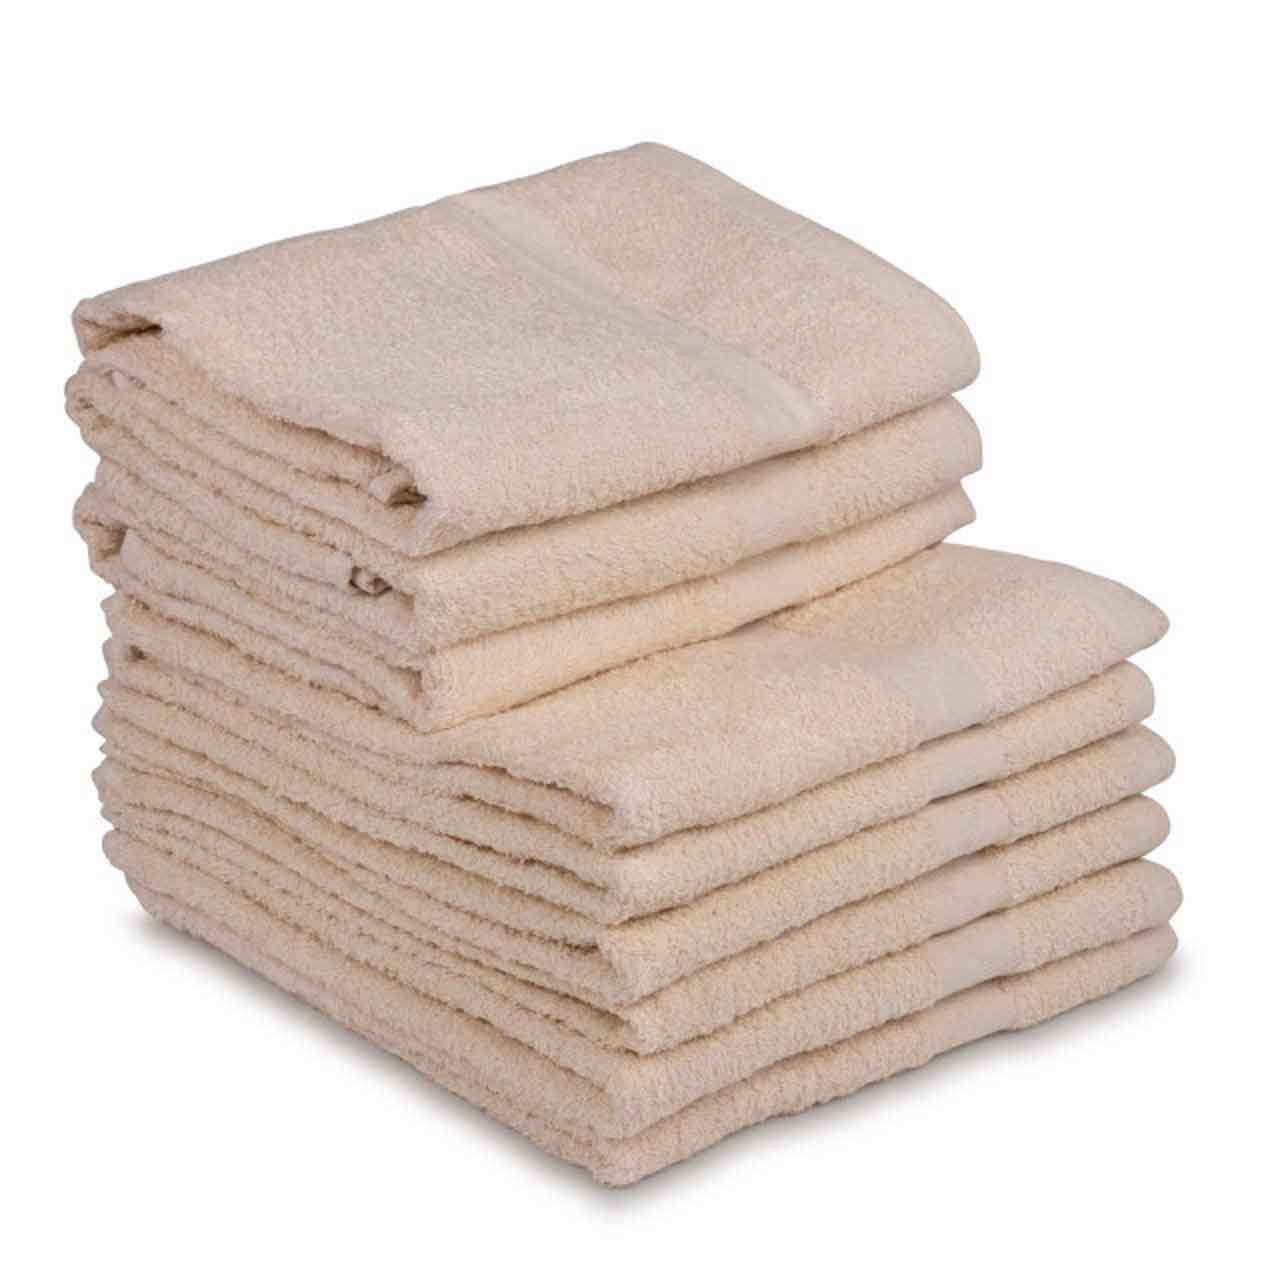 Do the livingquarters ecru and amphora cotton washcloths come in other colors?